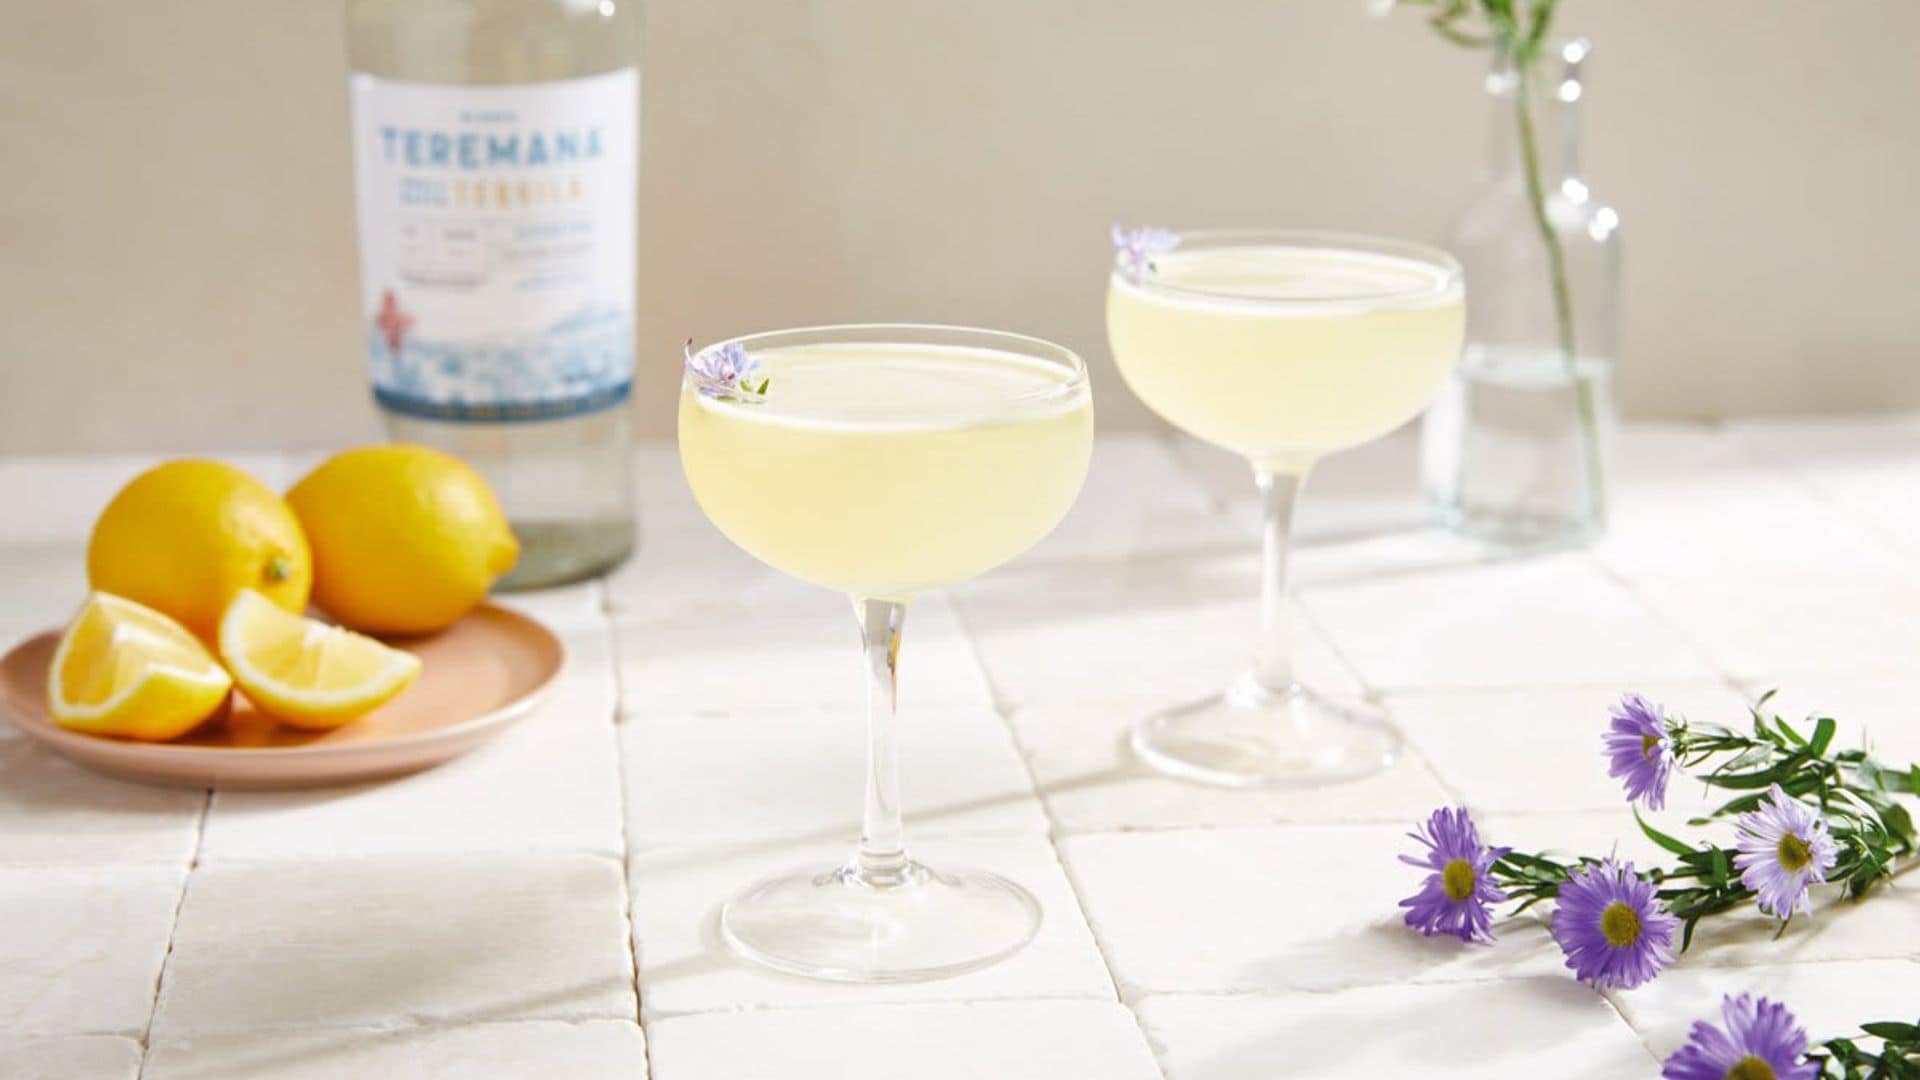 Over 30 cocktails to sip this spring